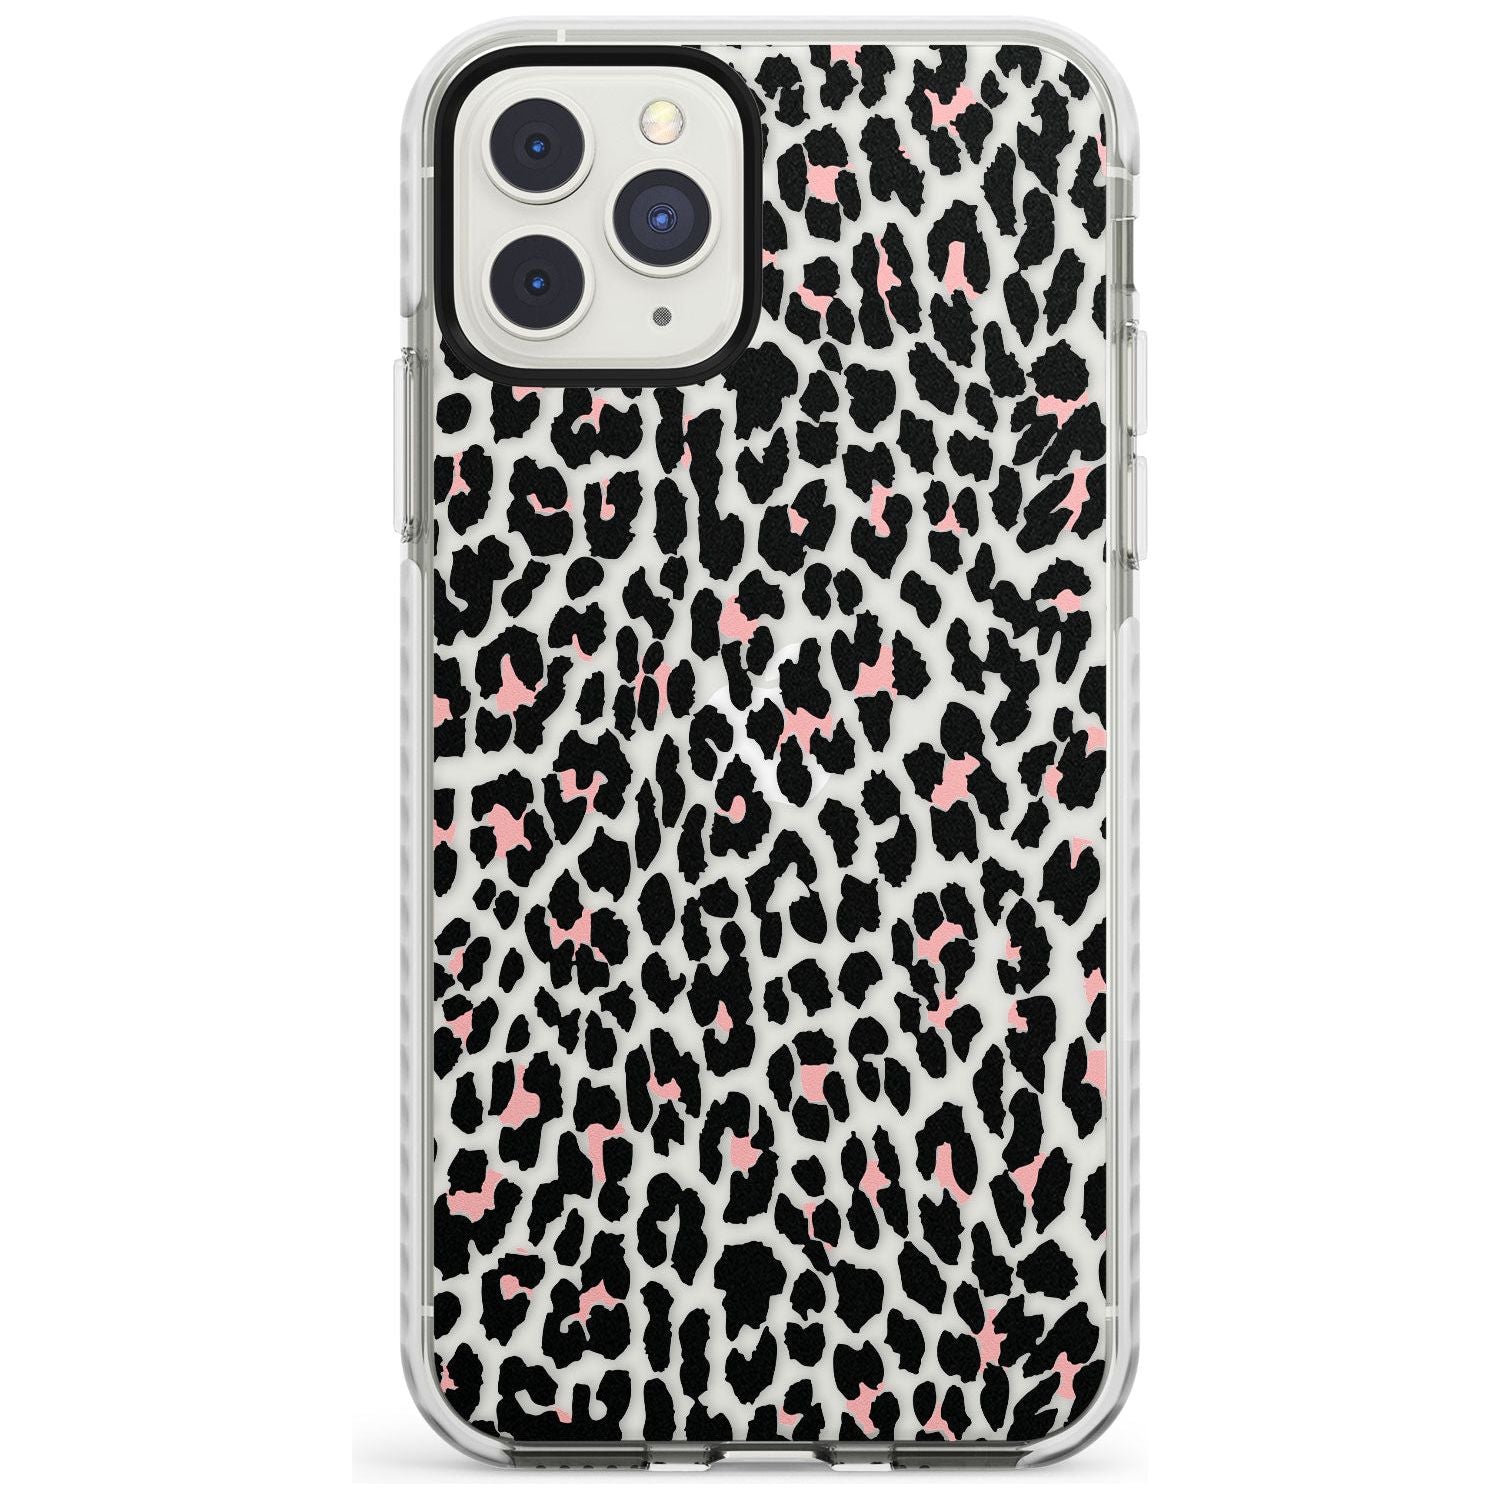 Light Pink Leopard Print - Transparent Impact Phone Case for iPhone 11 Pro Max